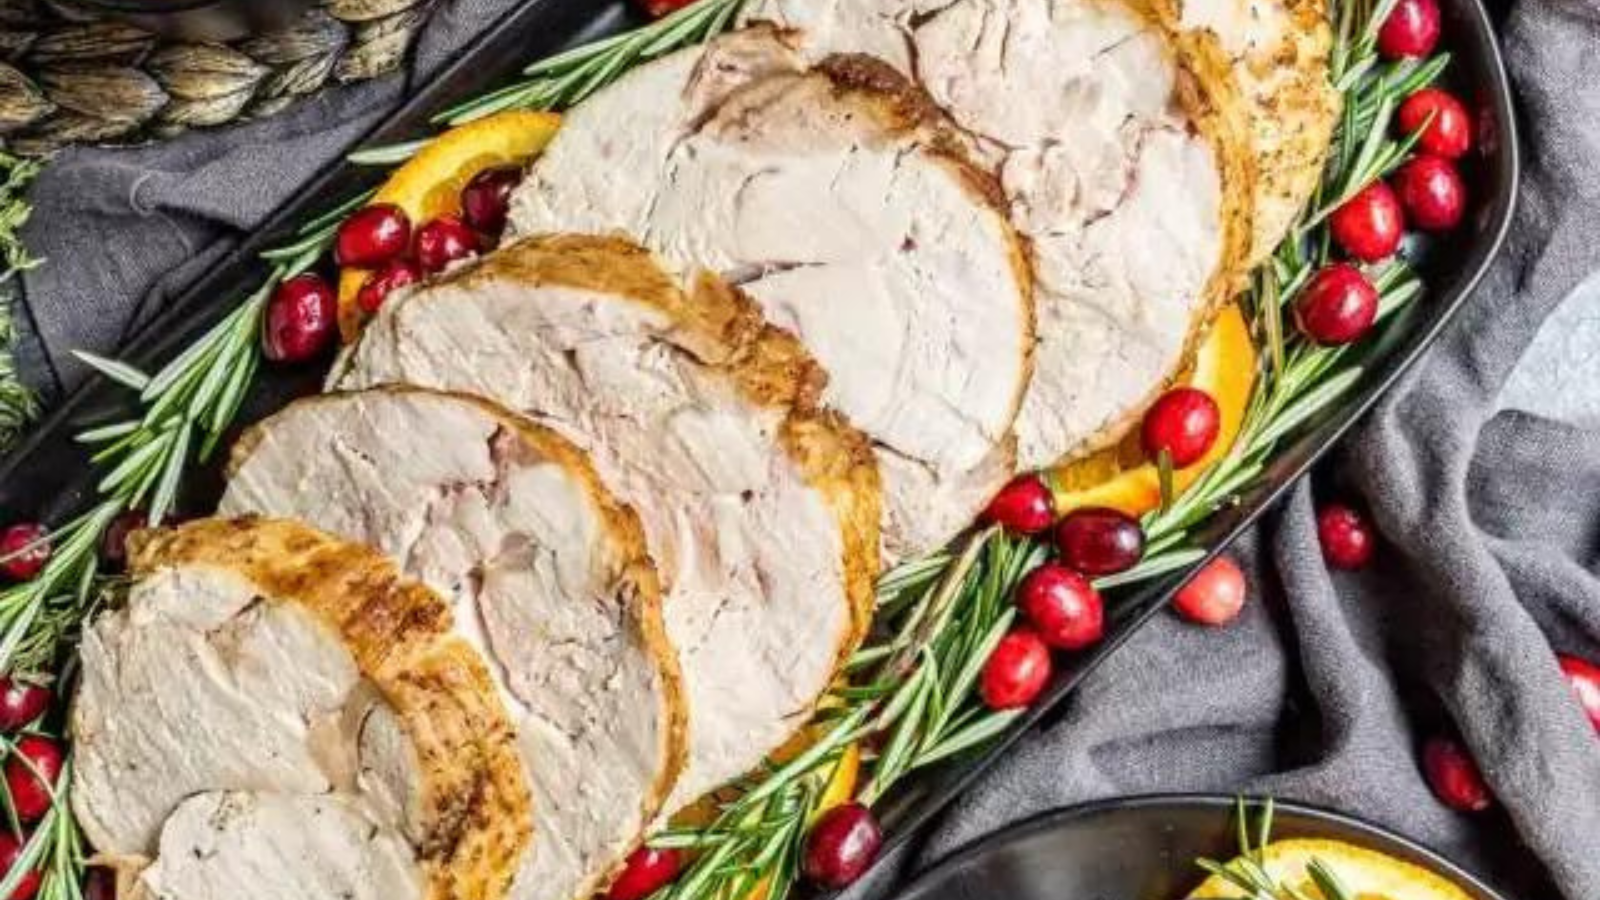  A sliced turkey breast with cranberry sauce.